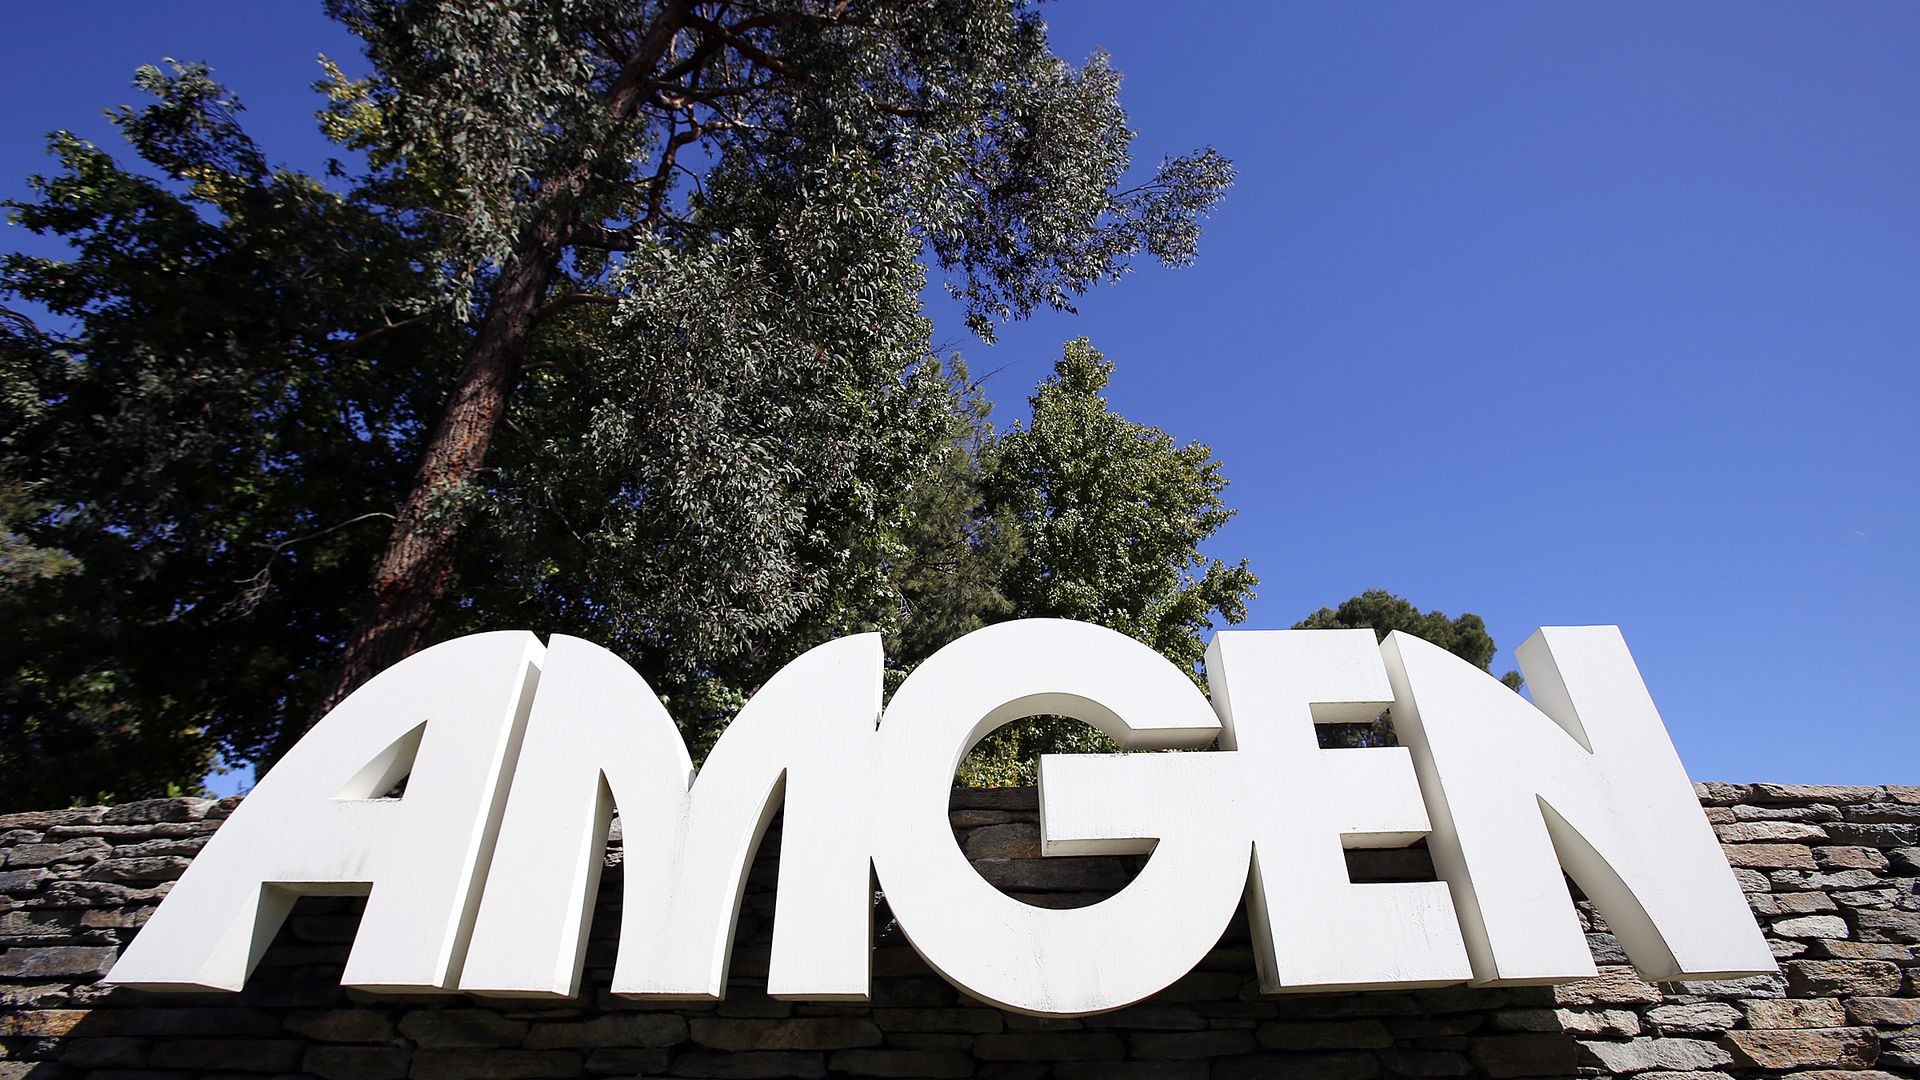 An image of the Amgen sign.